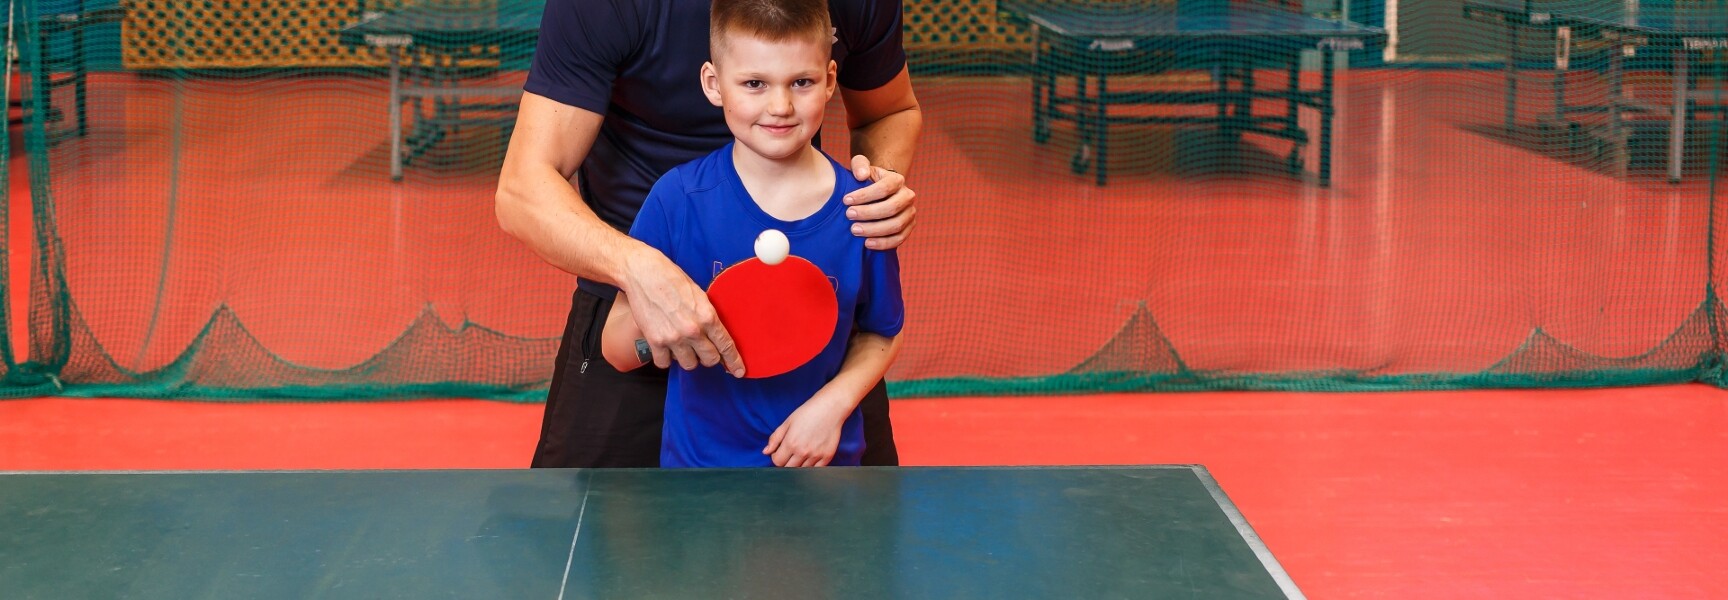 A kid being taught how to play table tennis.